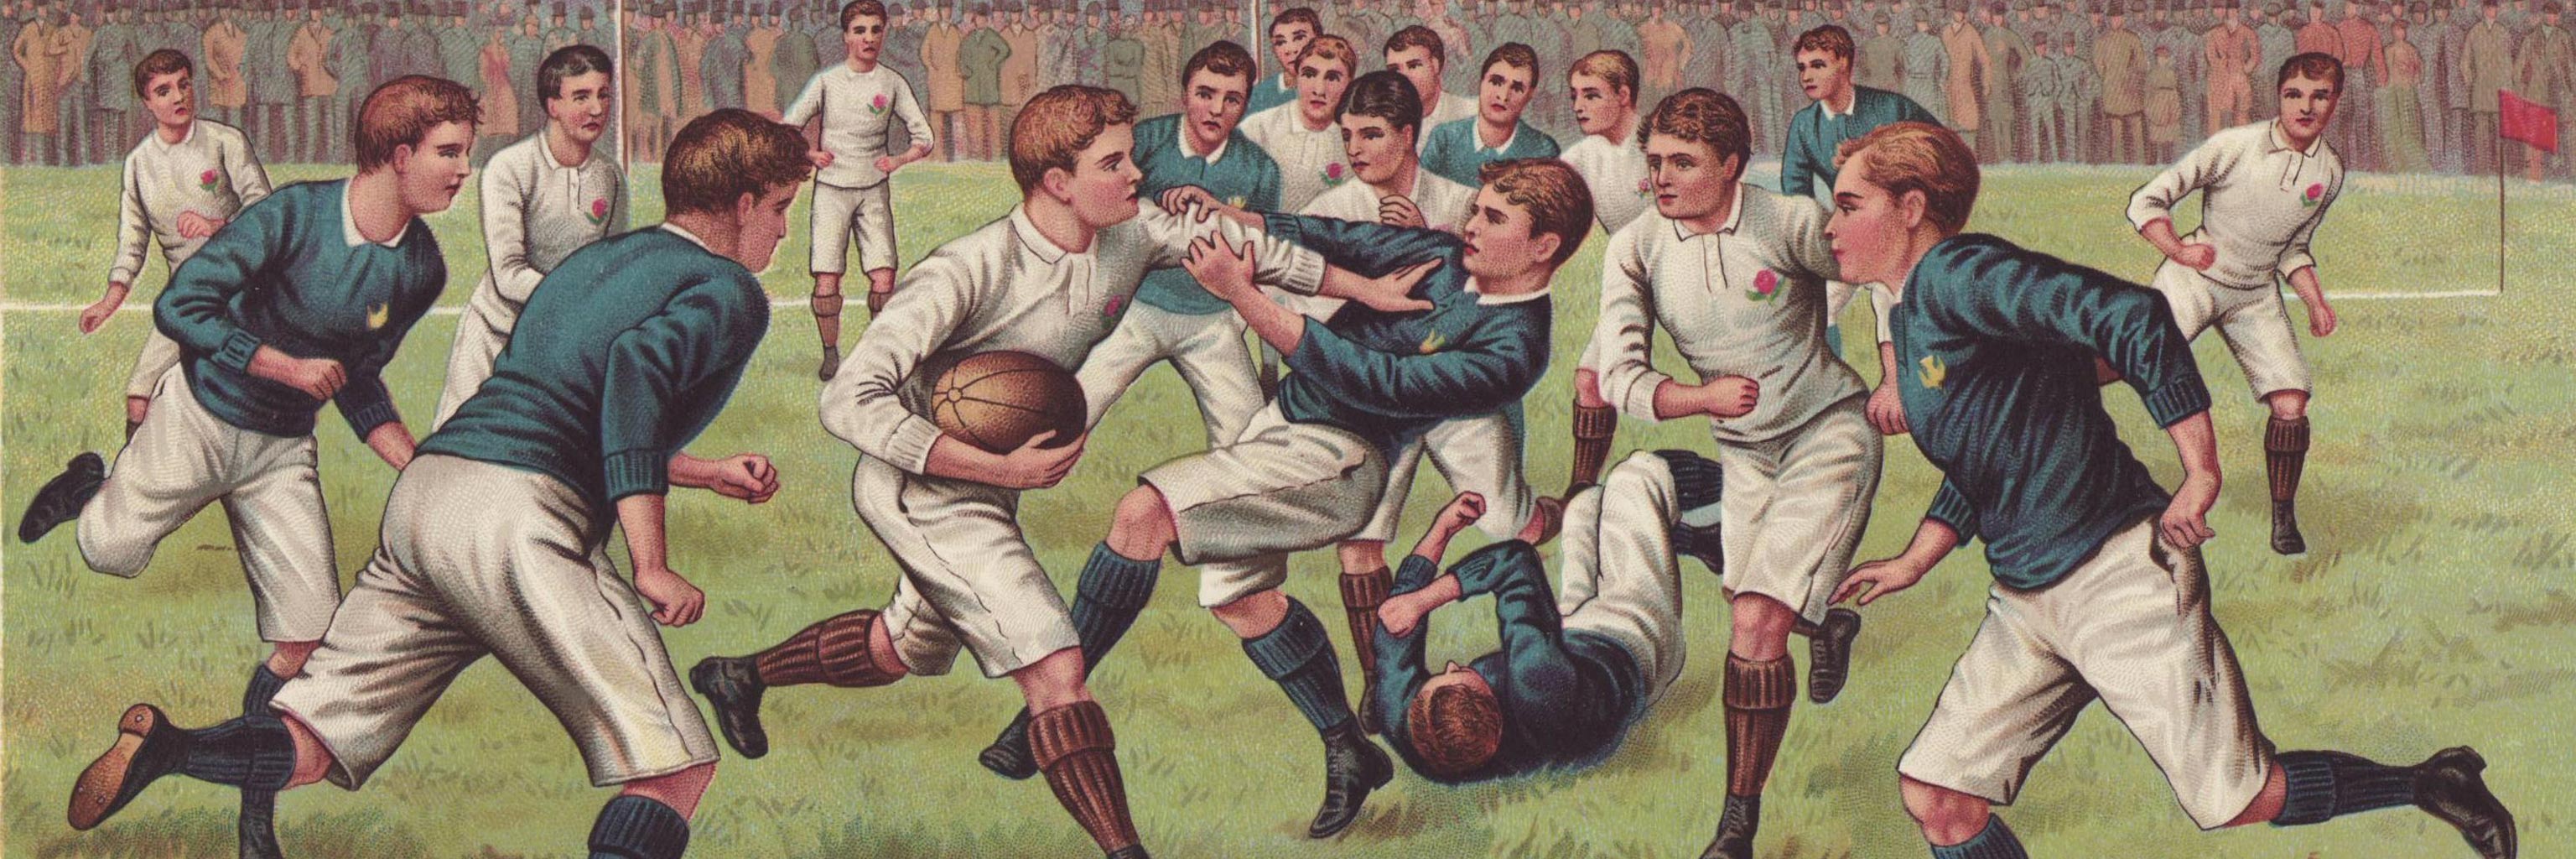 Rugby football match between England and Scotland, c. 1880